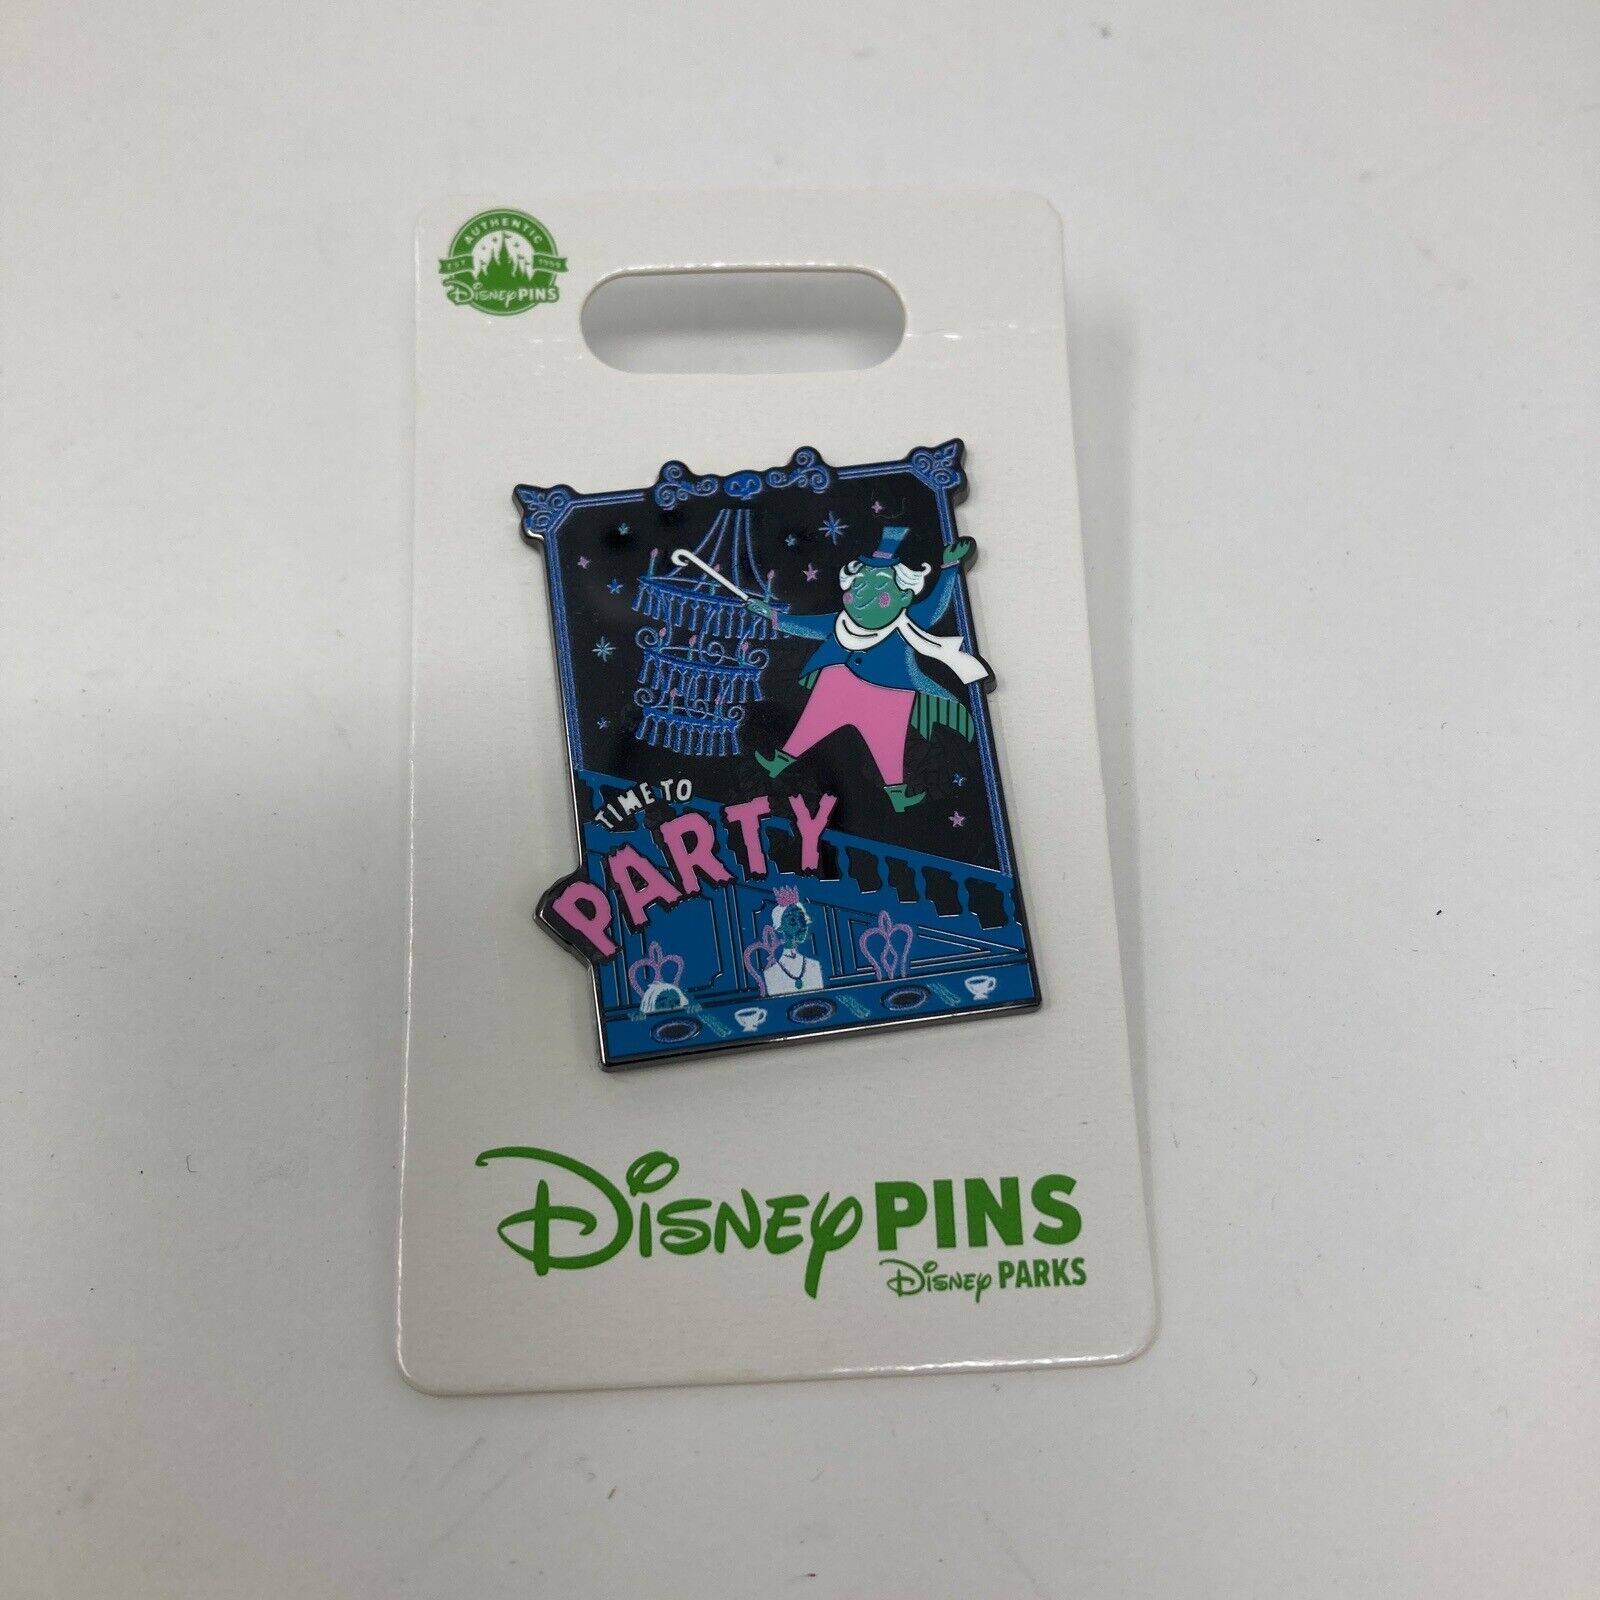 The Haunted Mansion Ballroom Scene Time To Party Disney Pin